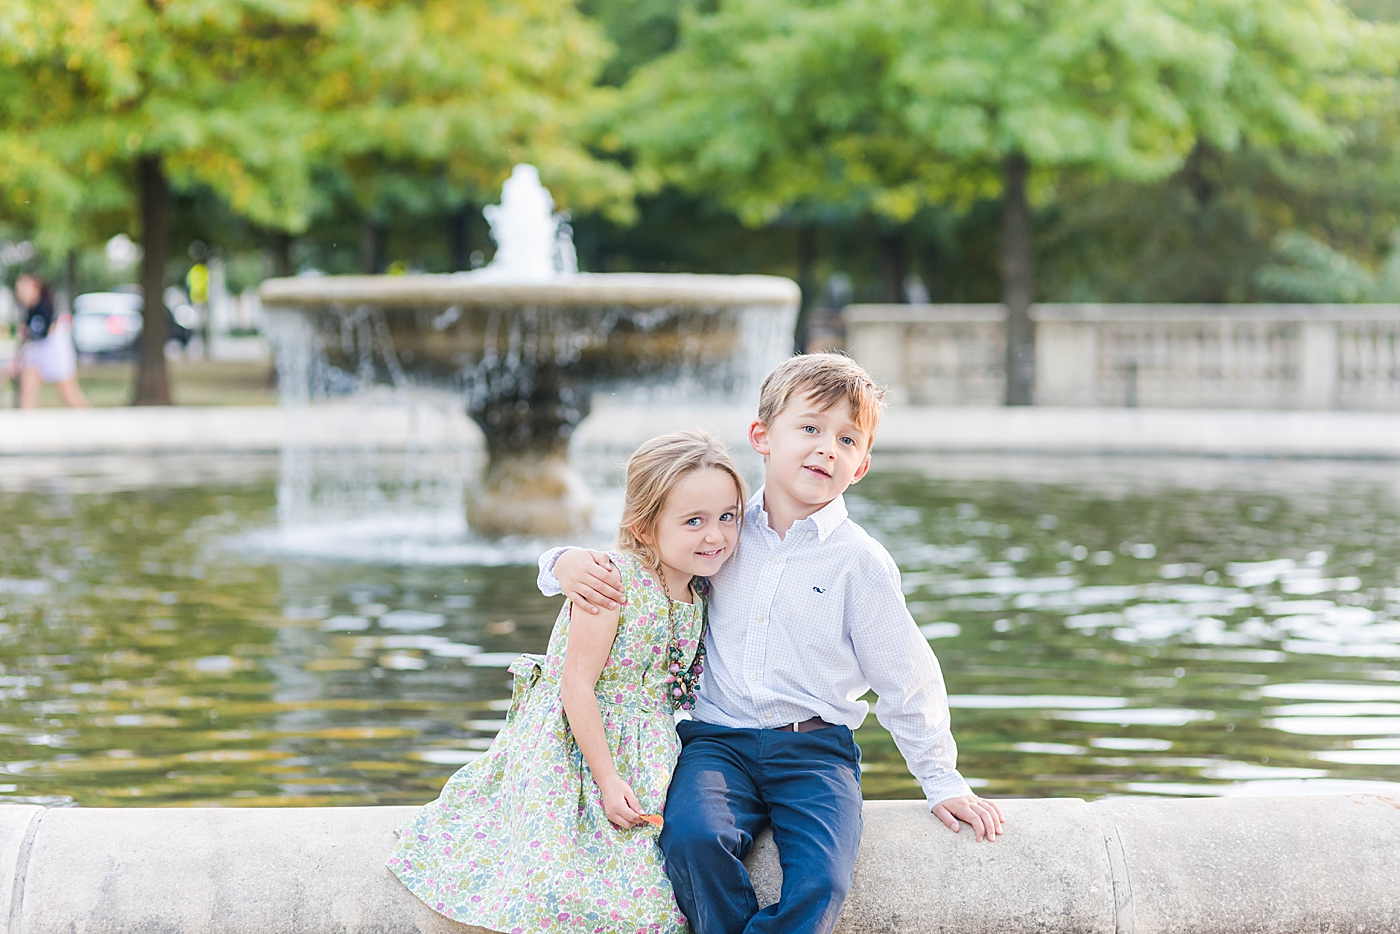 Siblings sitting together at a fountain | Photo by Anna Wisjo Photography